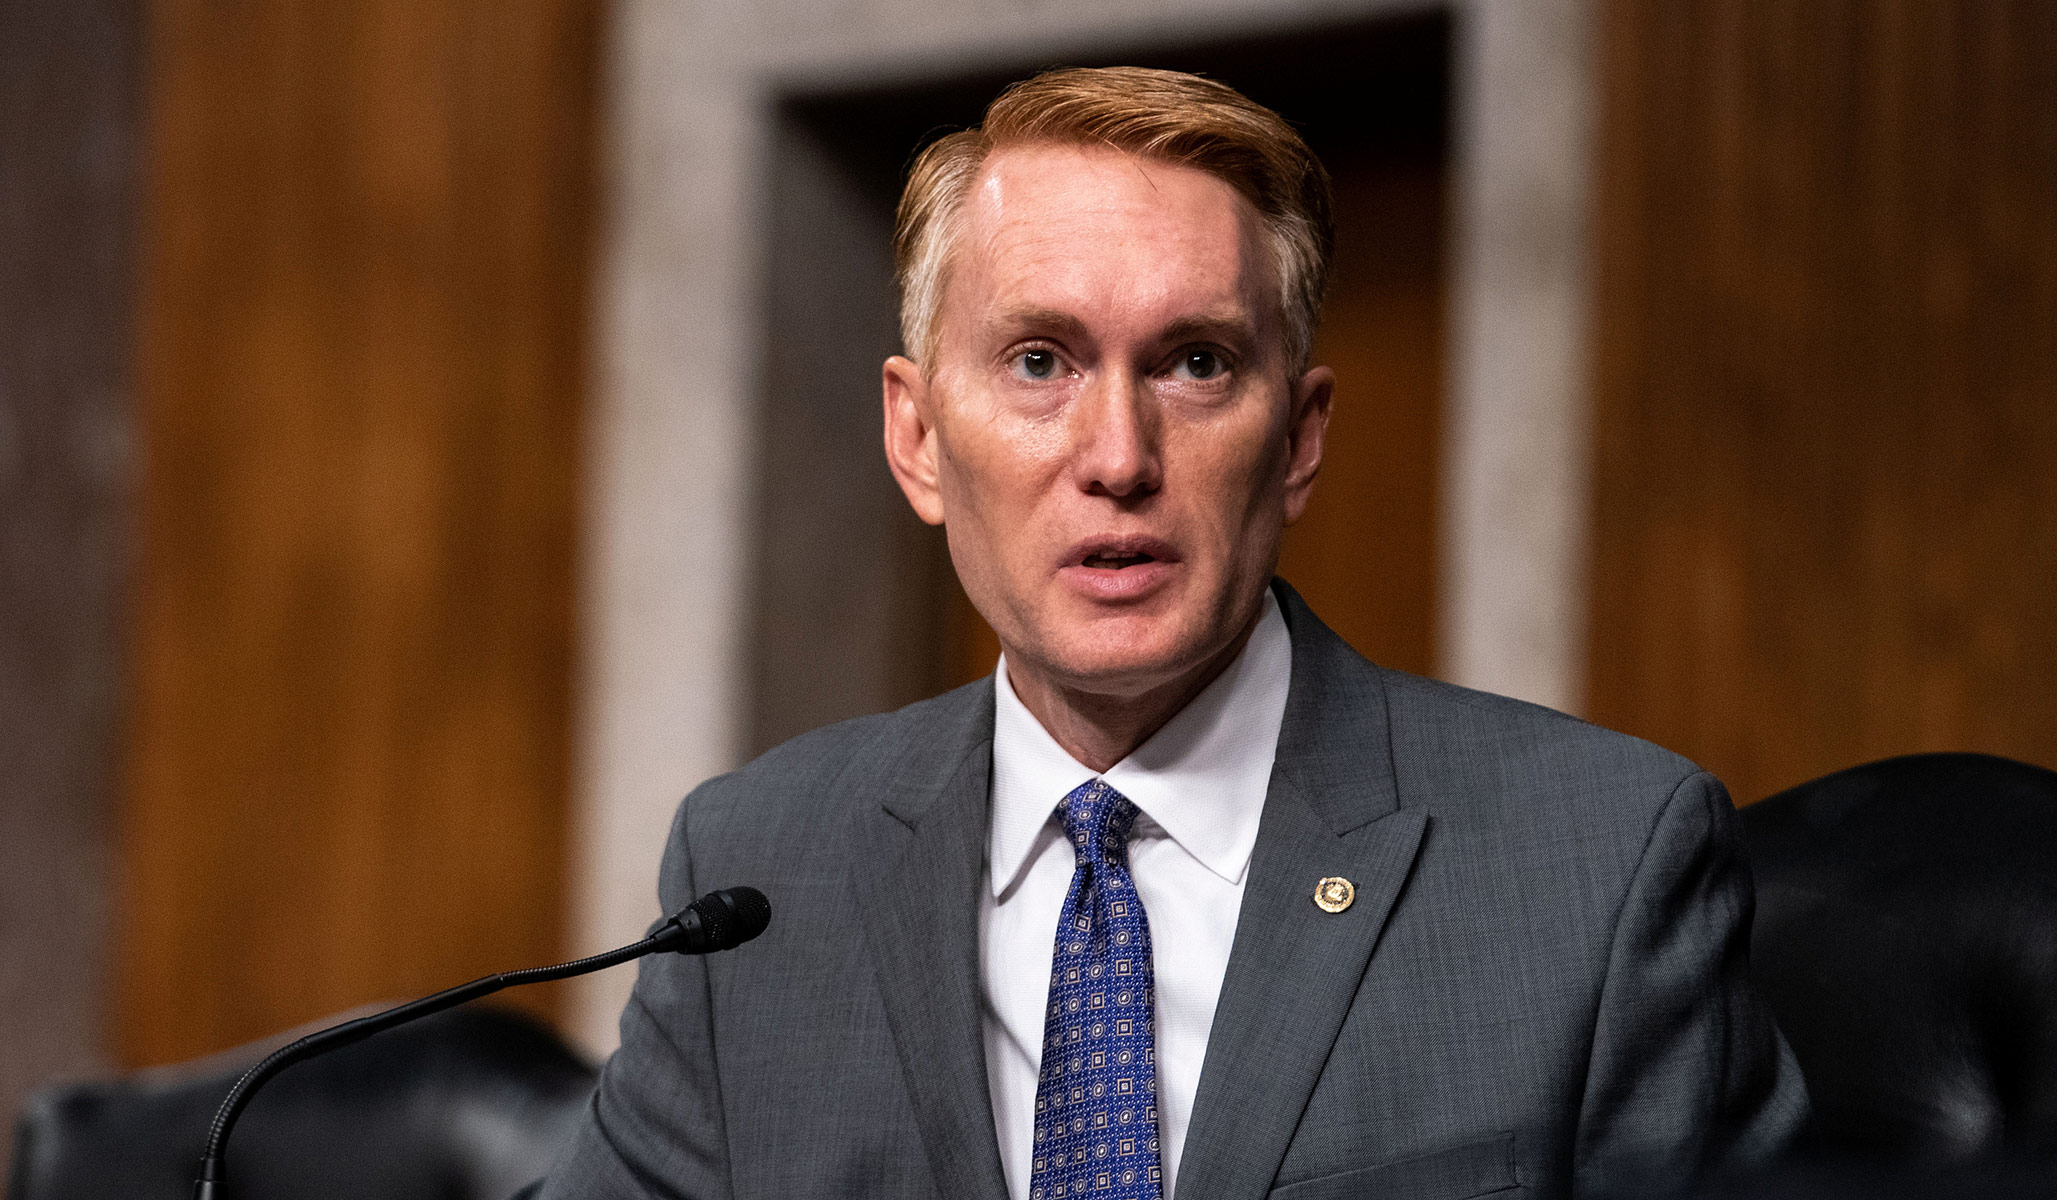 U.S. Sen. James Lankford Says God ‘Hasn’t Given Up’ on the United States on Comparison to Sodom